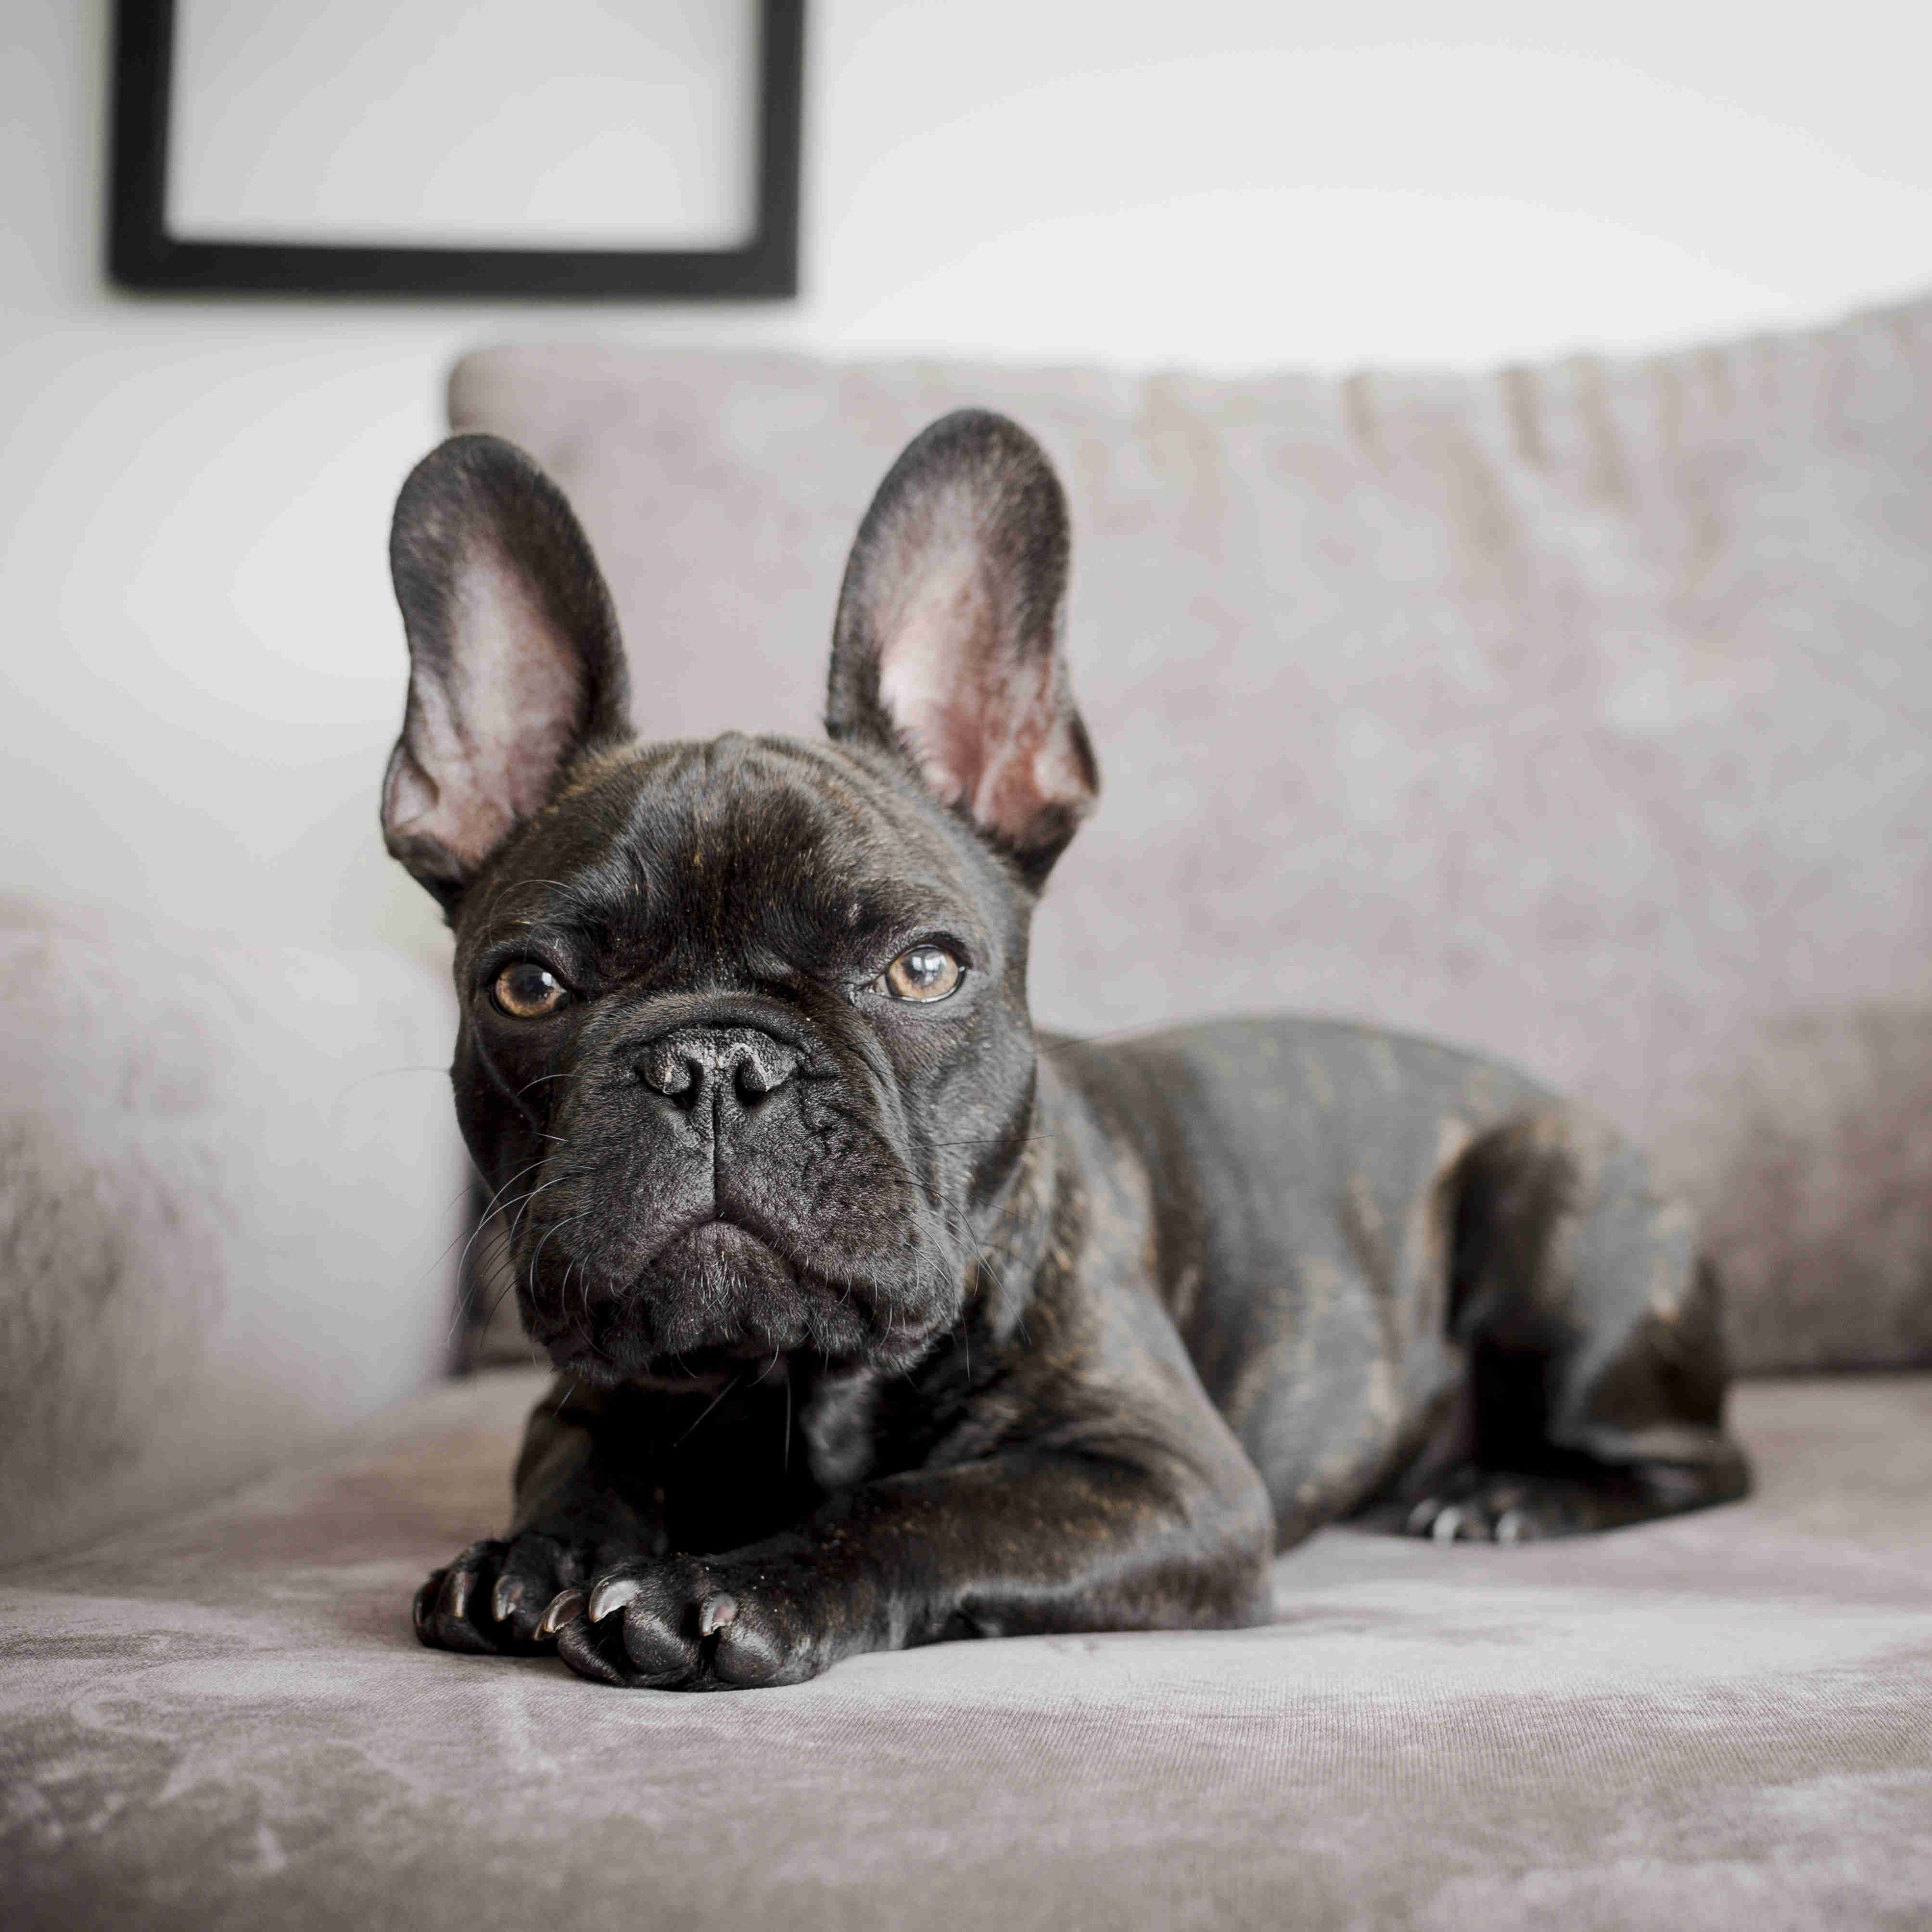 10 Tips to Keep Your French Bulldog Puppy Cool and Comfortable in Hot Weather